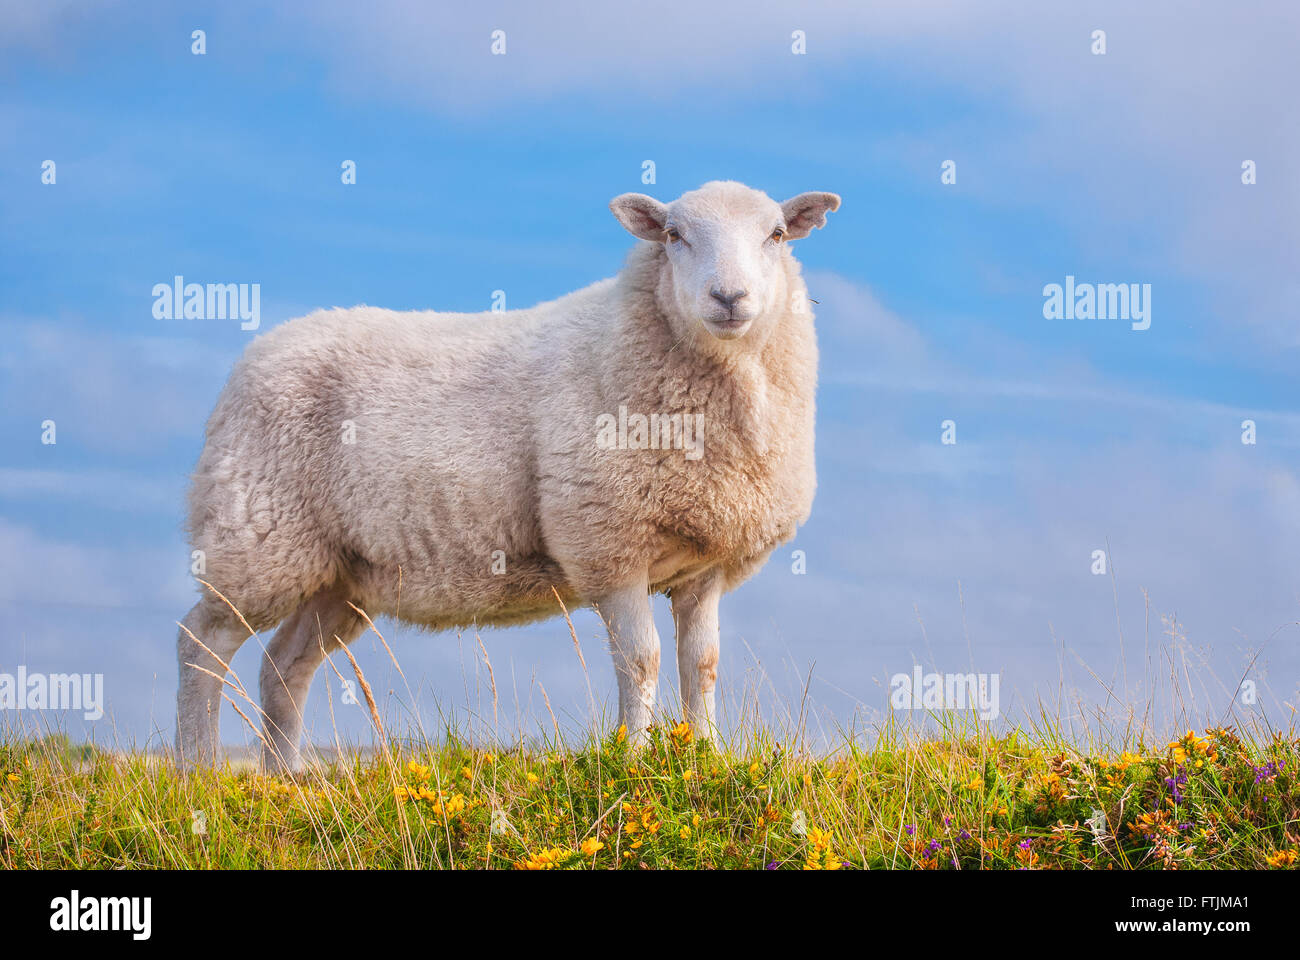 A single sheep standing on pretty grass against blue sky, looking at the camera. Stock Photo